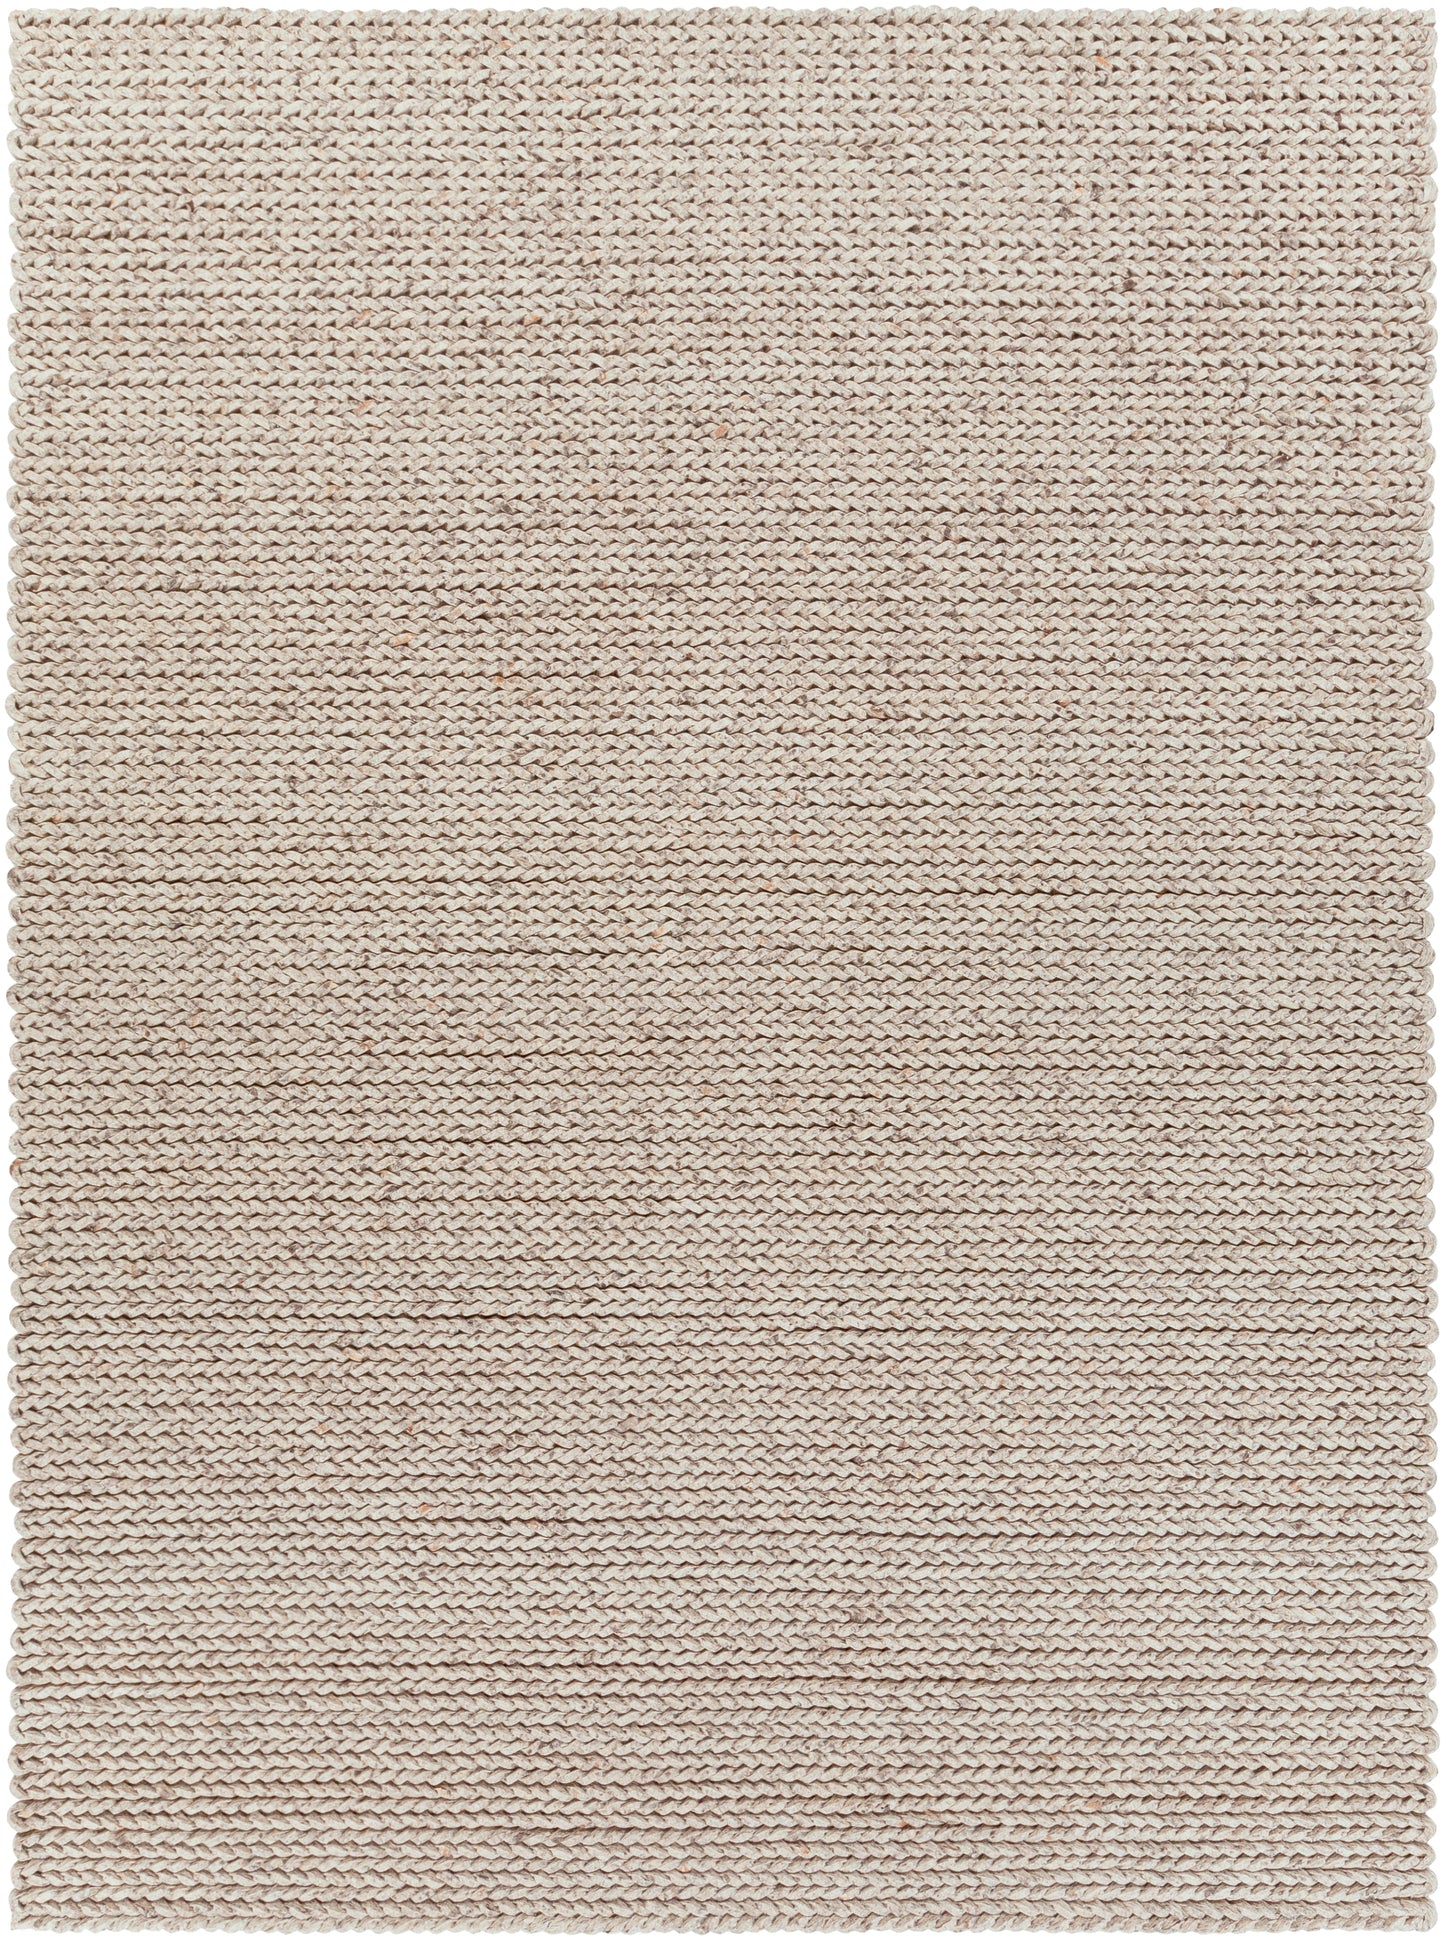 Anchorage 298 Hand Woven Wool Indoor Area Rug by Surya Rugs